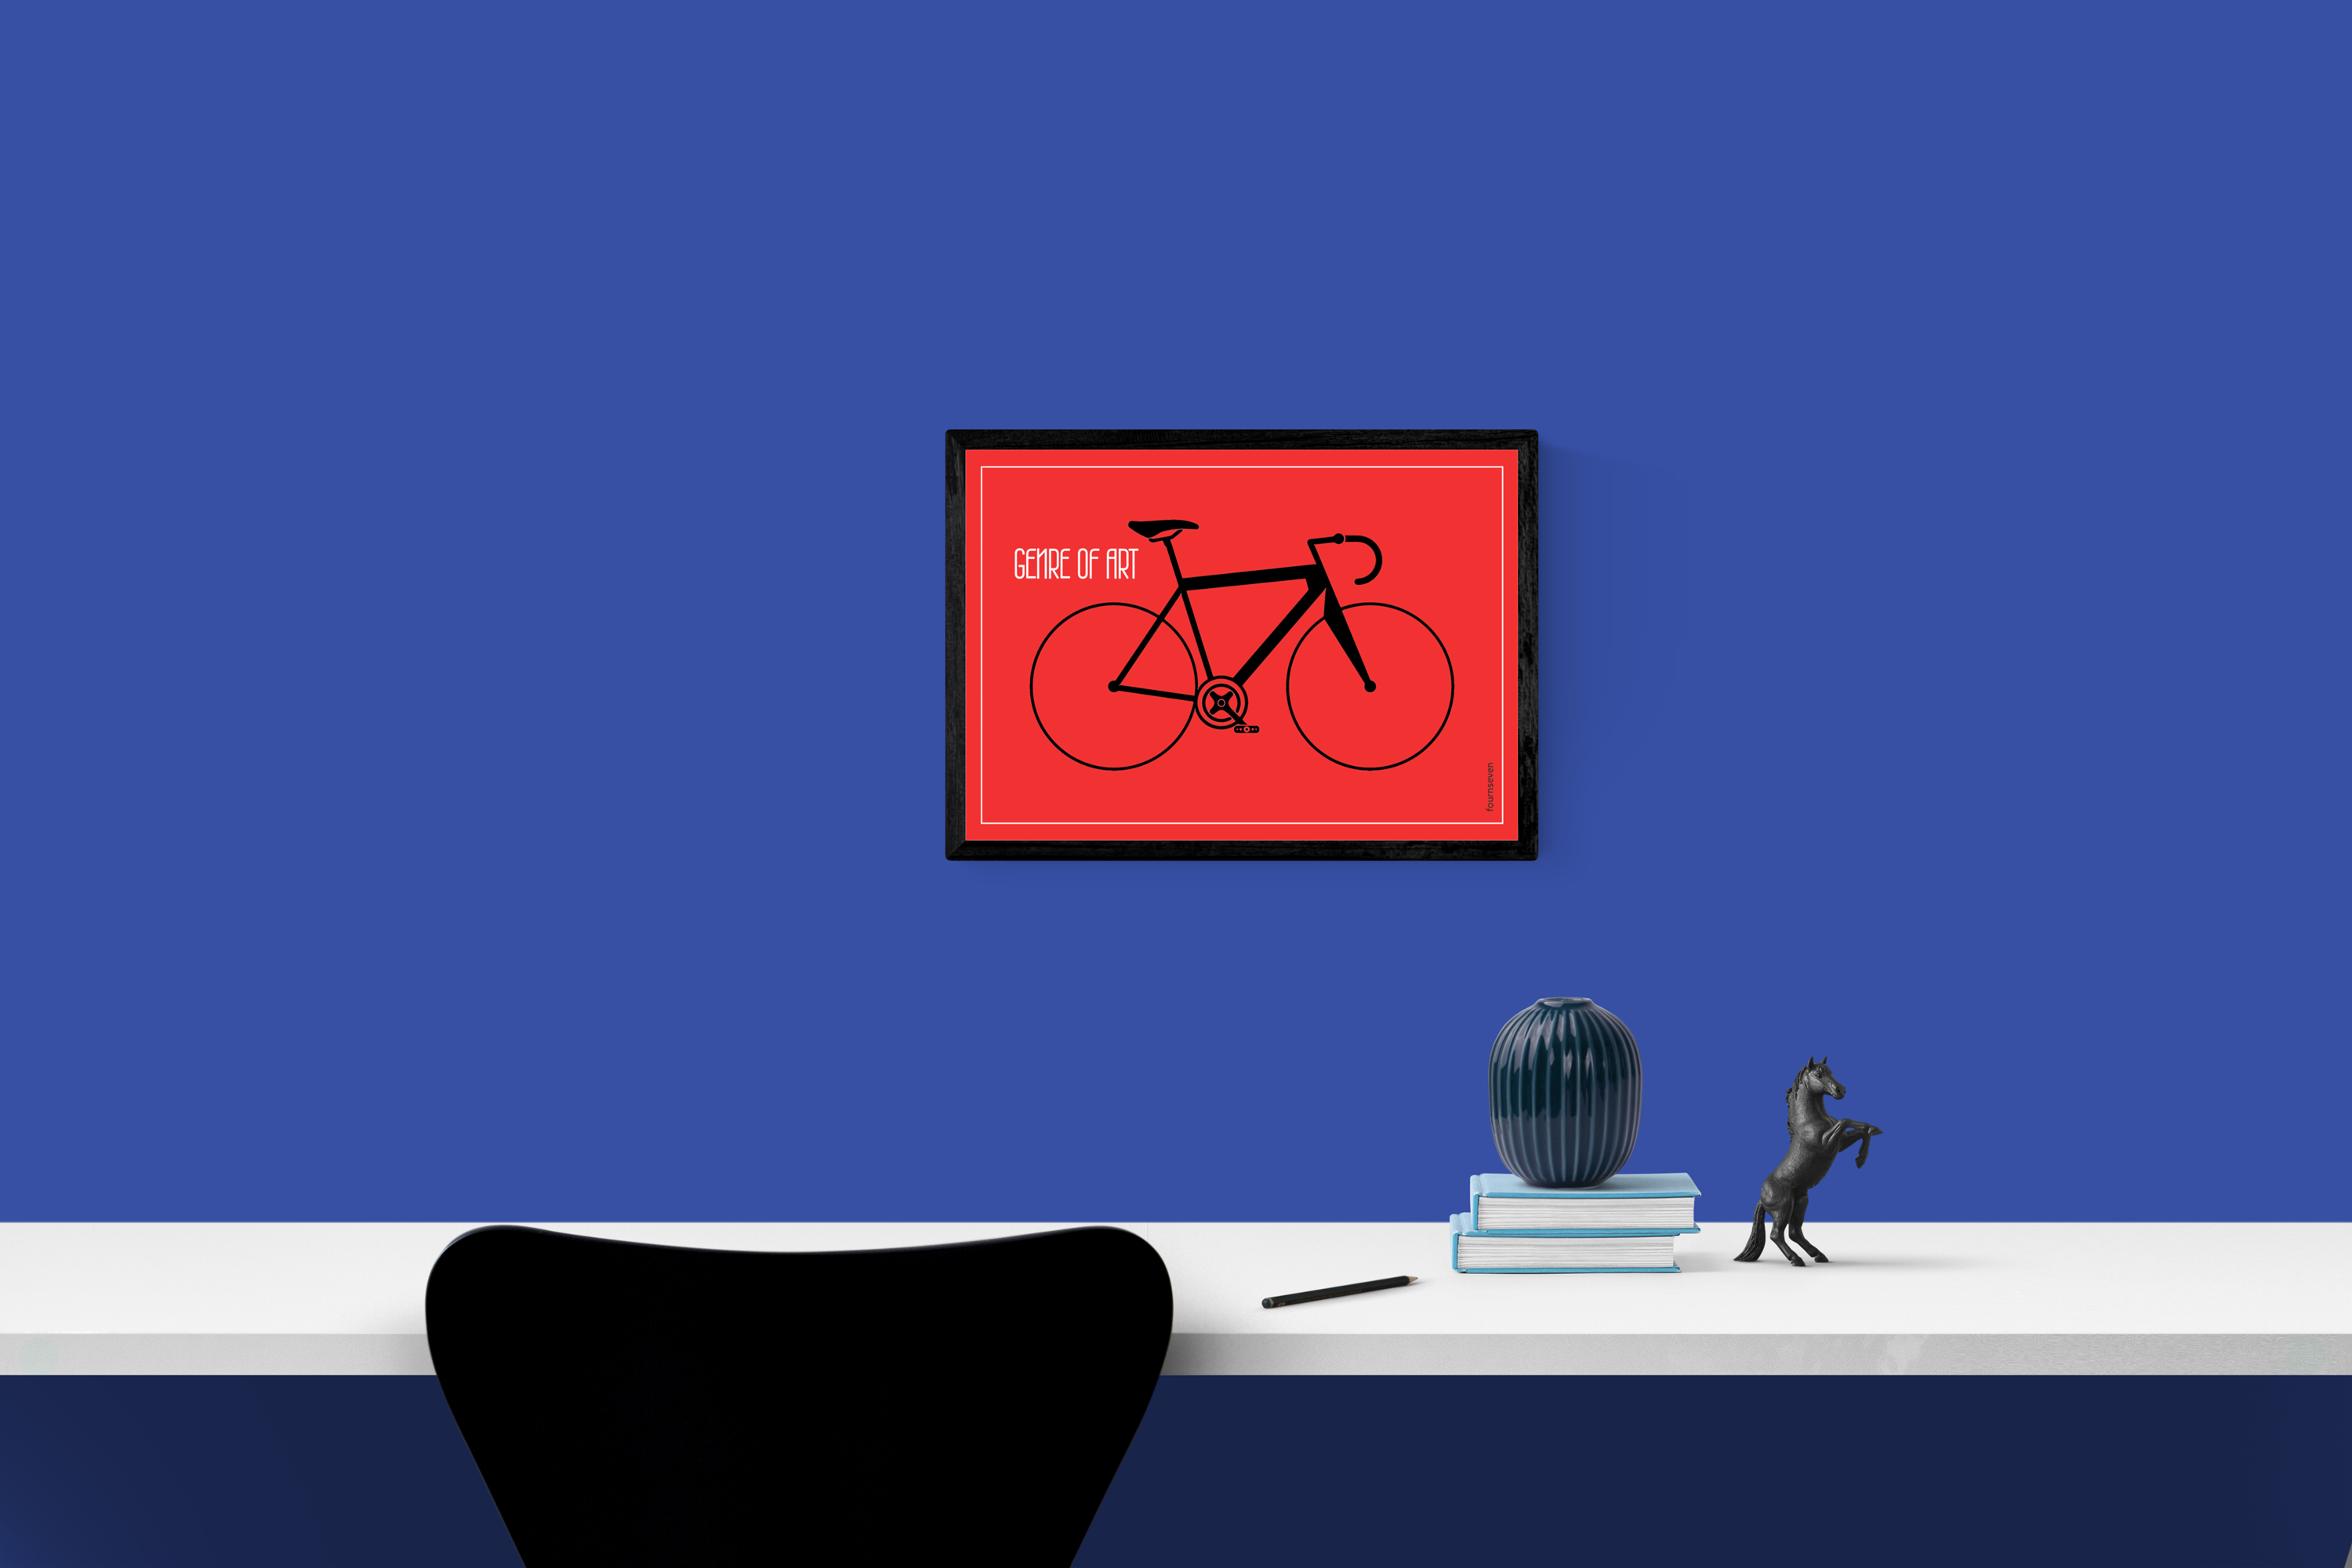 "Genre of art" bicycle sport theme poster. 